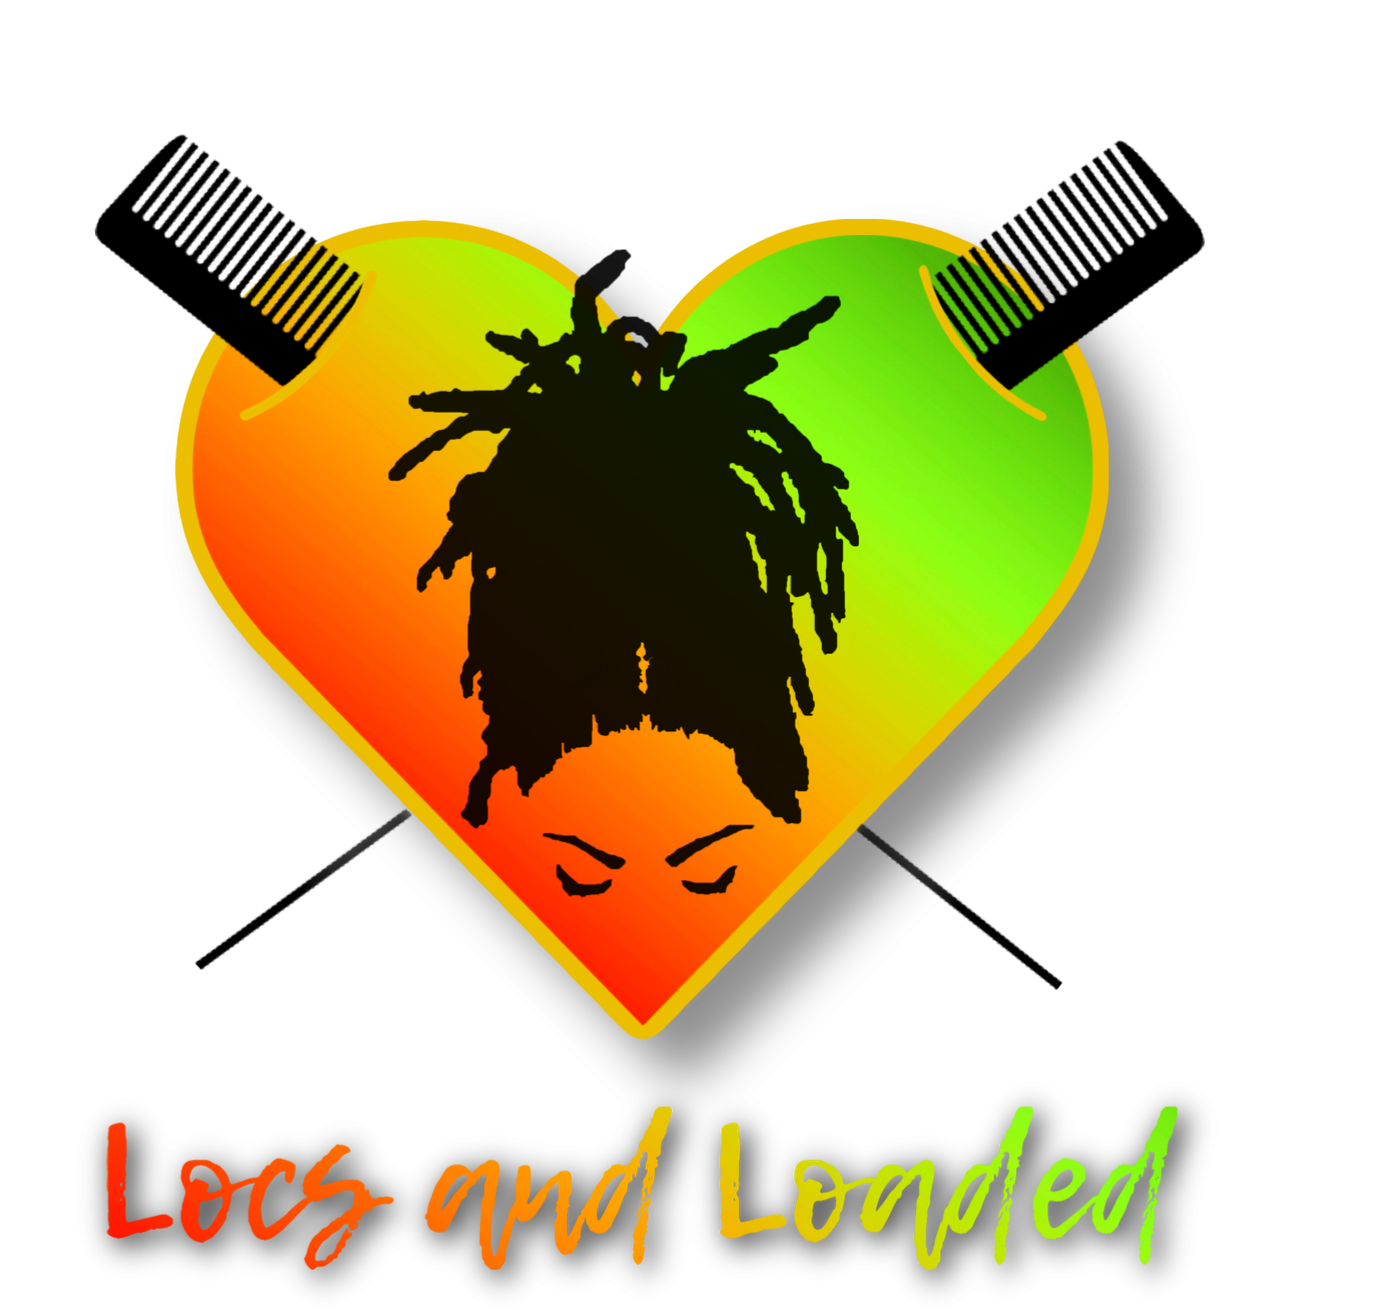 Locs and Loaded